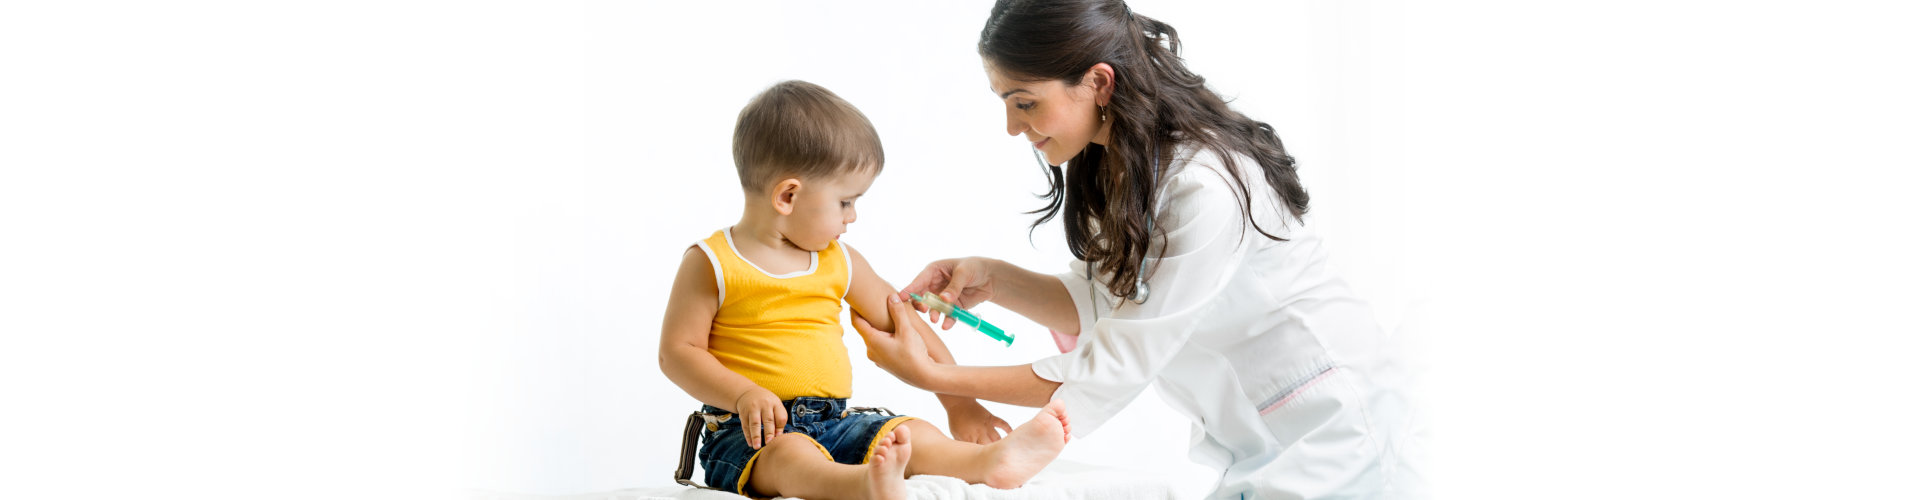 doctor injecting a vaccine to a child